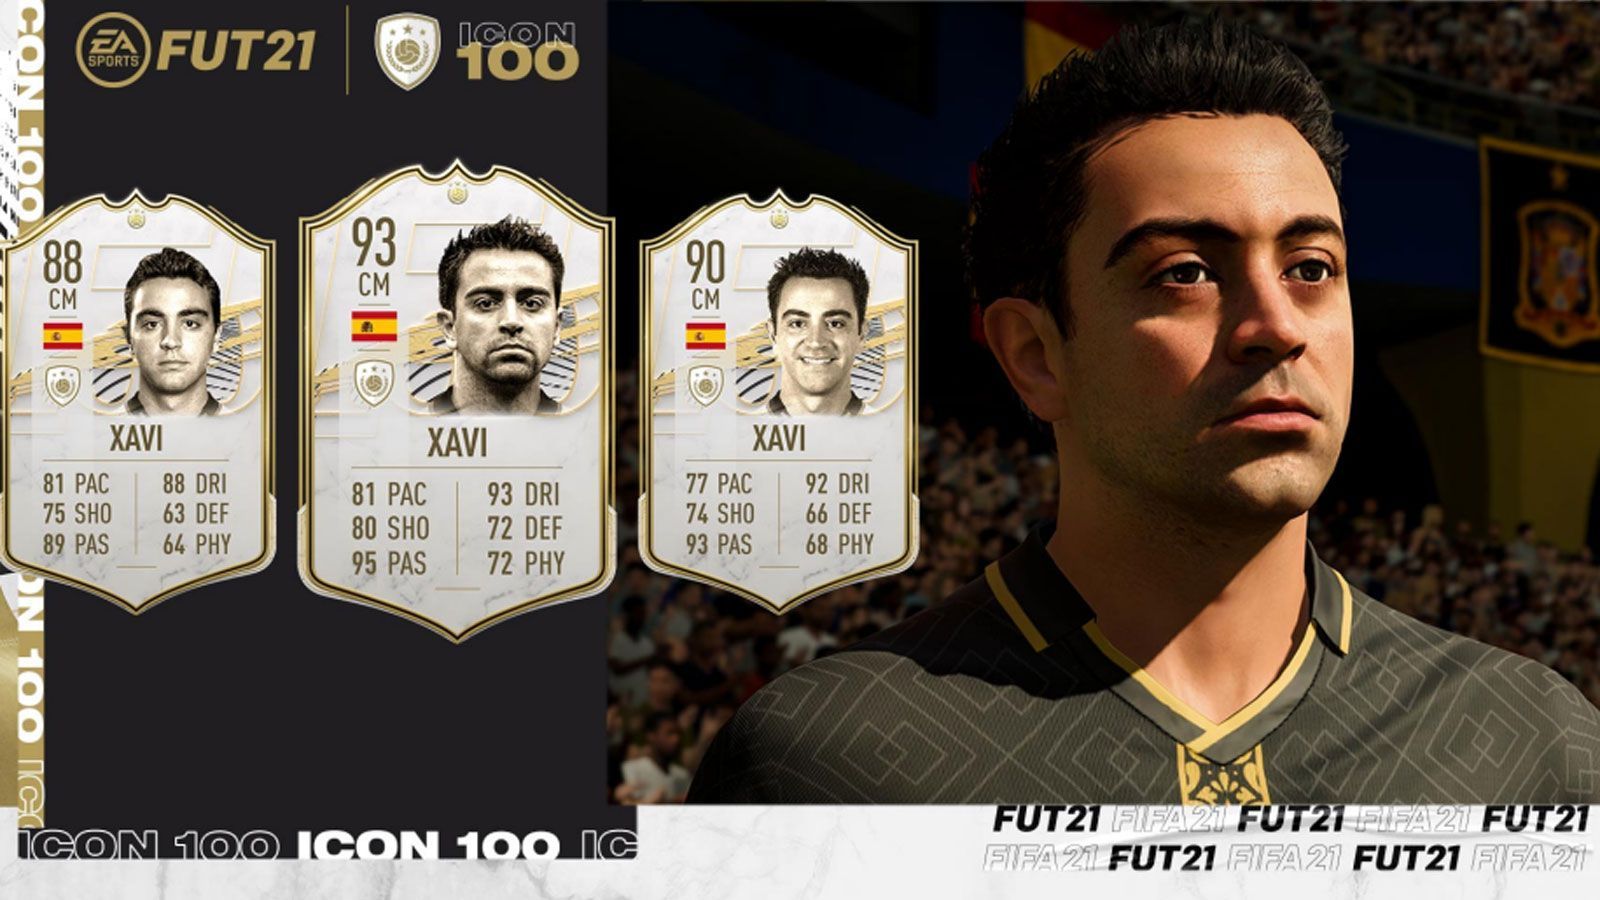 
                <strong>Xavi Hernandez</strong><br>
                Position: Zentrales MittelfeldBasis-Icon-Rating: 88Mid-Icon-Rating: 90Prime-Icon-Rating: 93
              